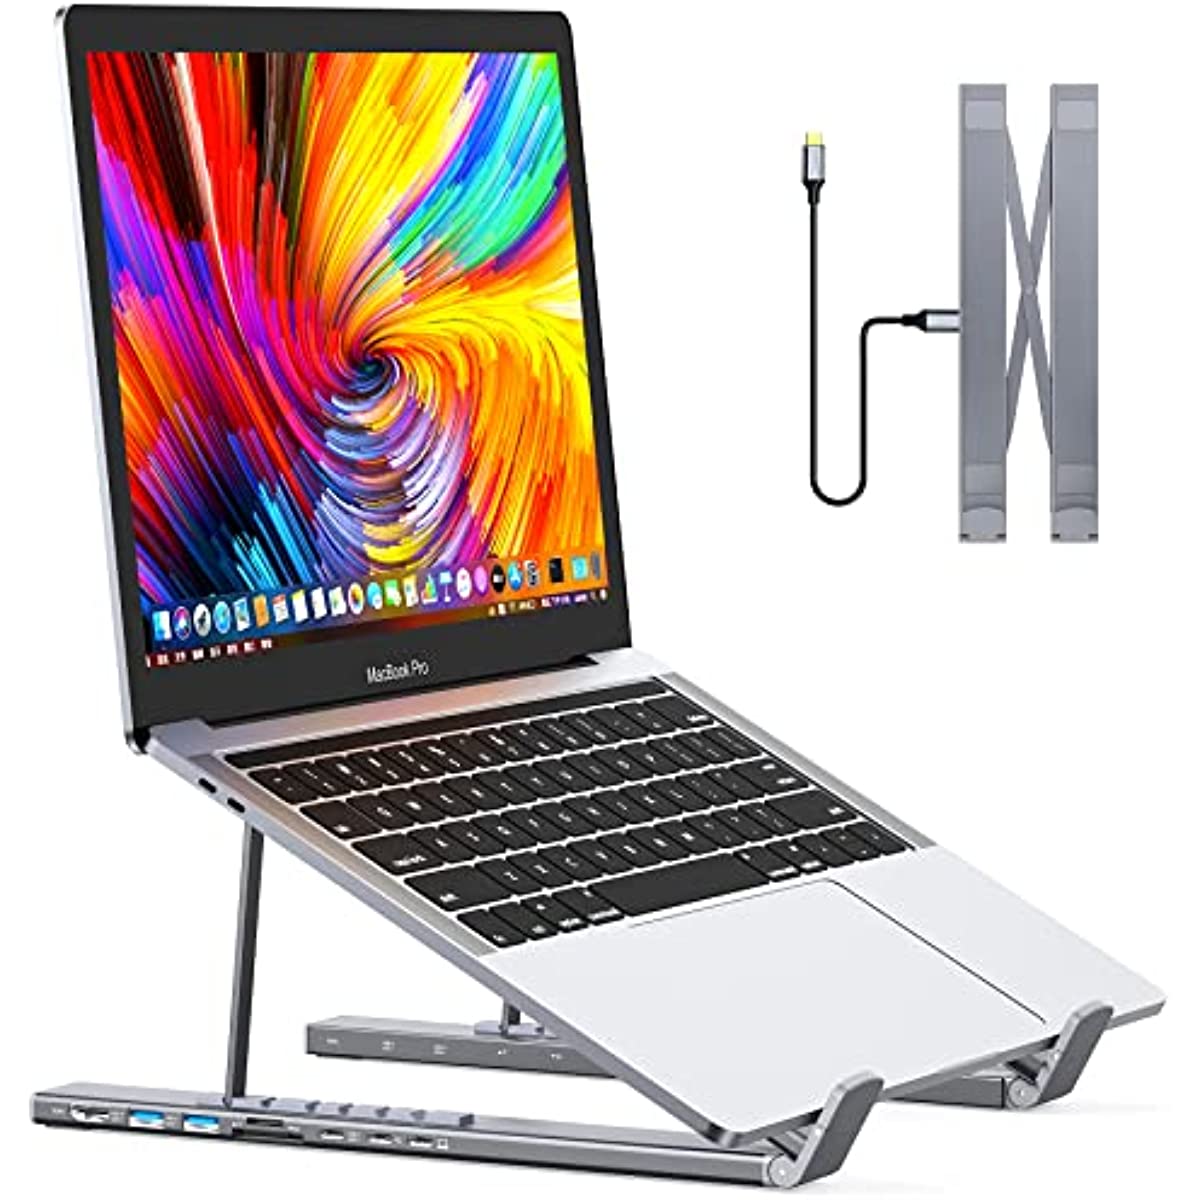 USB C Laptop Docking Station Stand, 7 in 1 USB C Hub with 4K HDMI